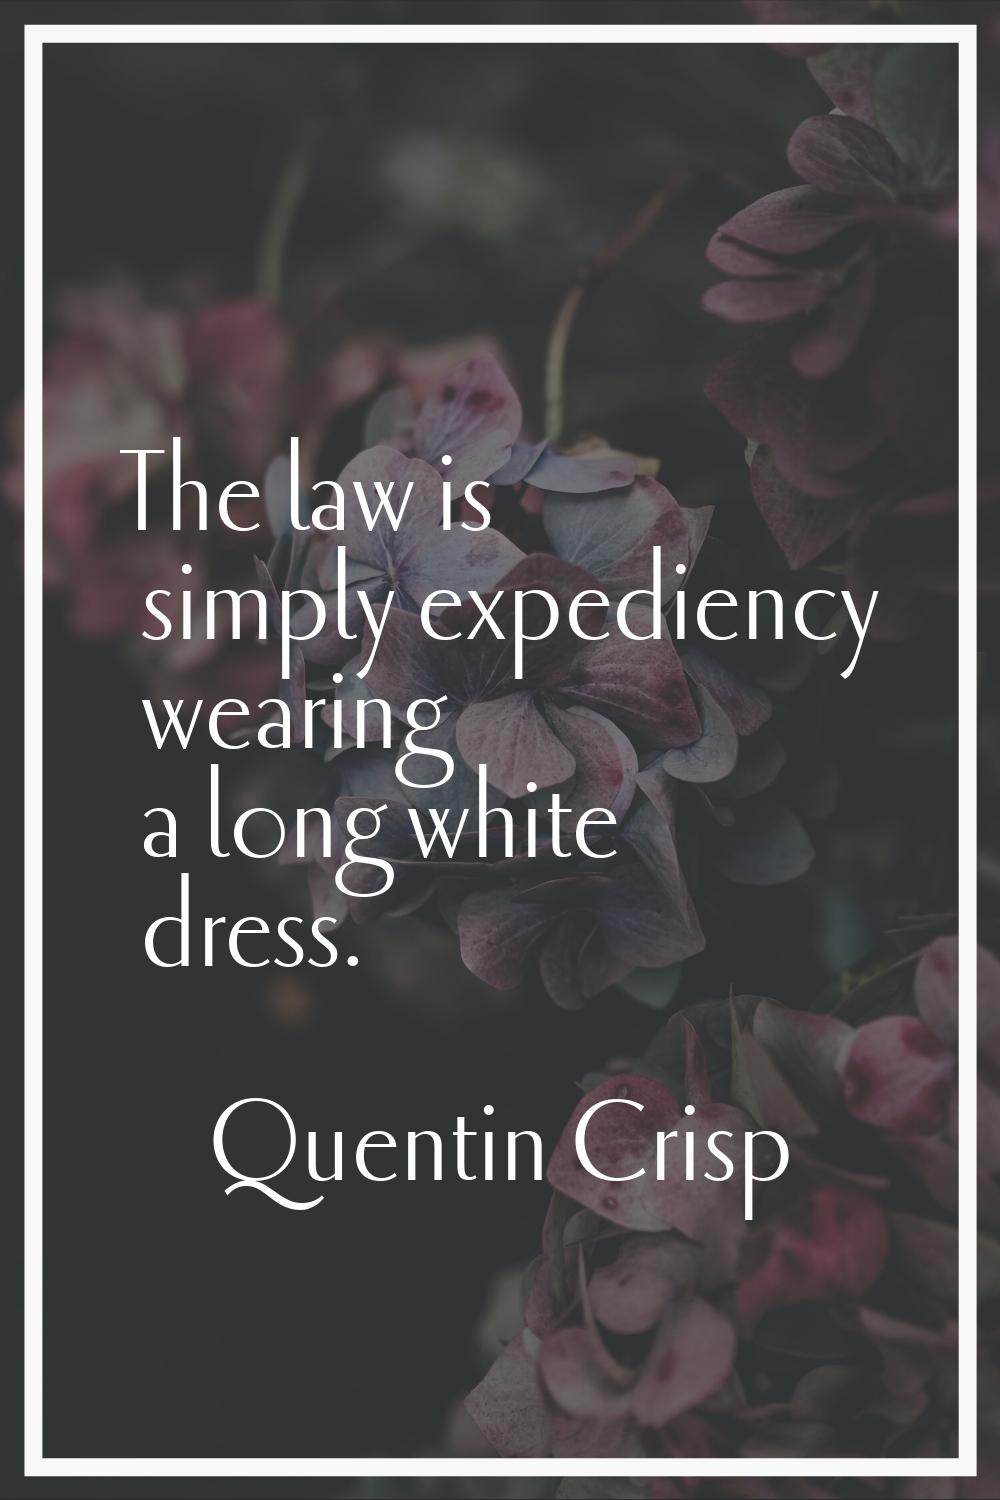 The law is simply expediency wearing a long white dress.